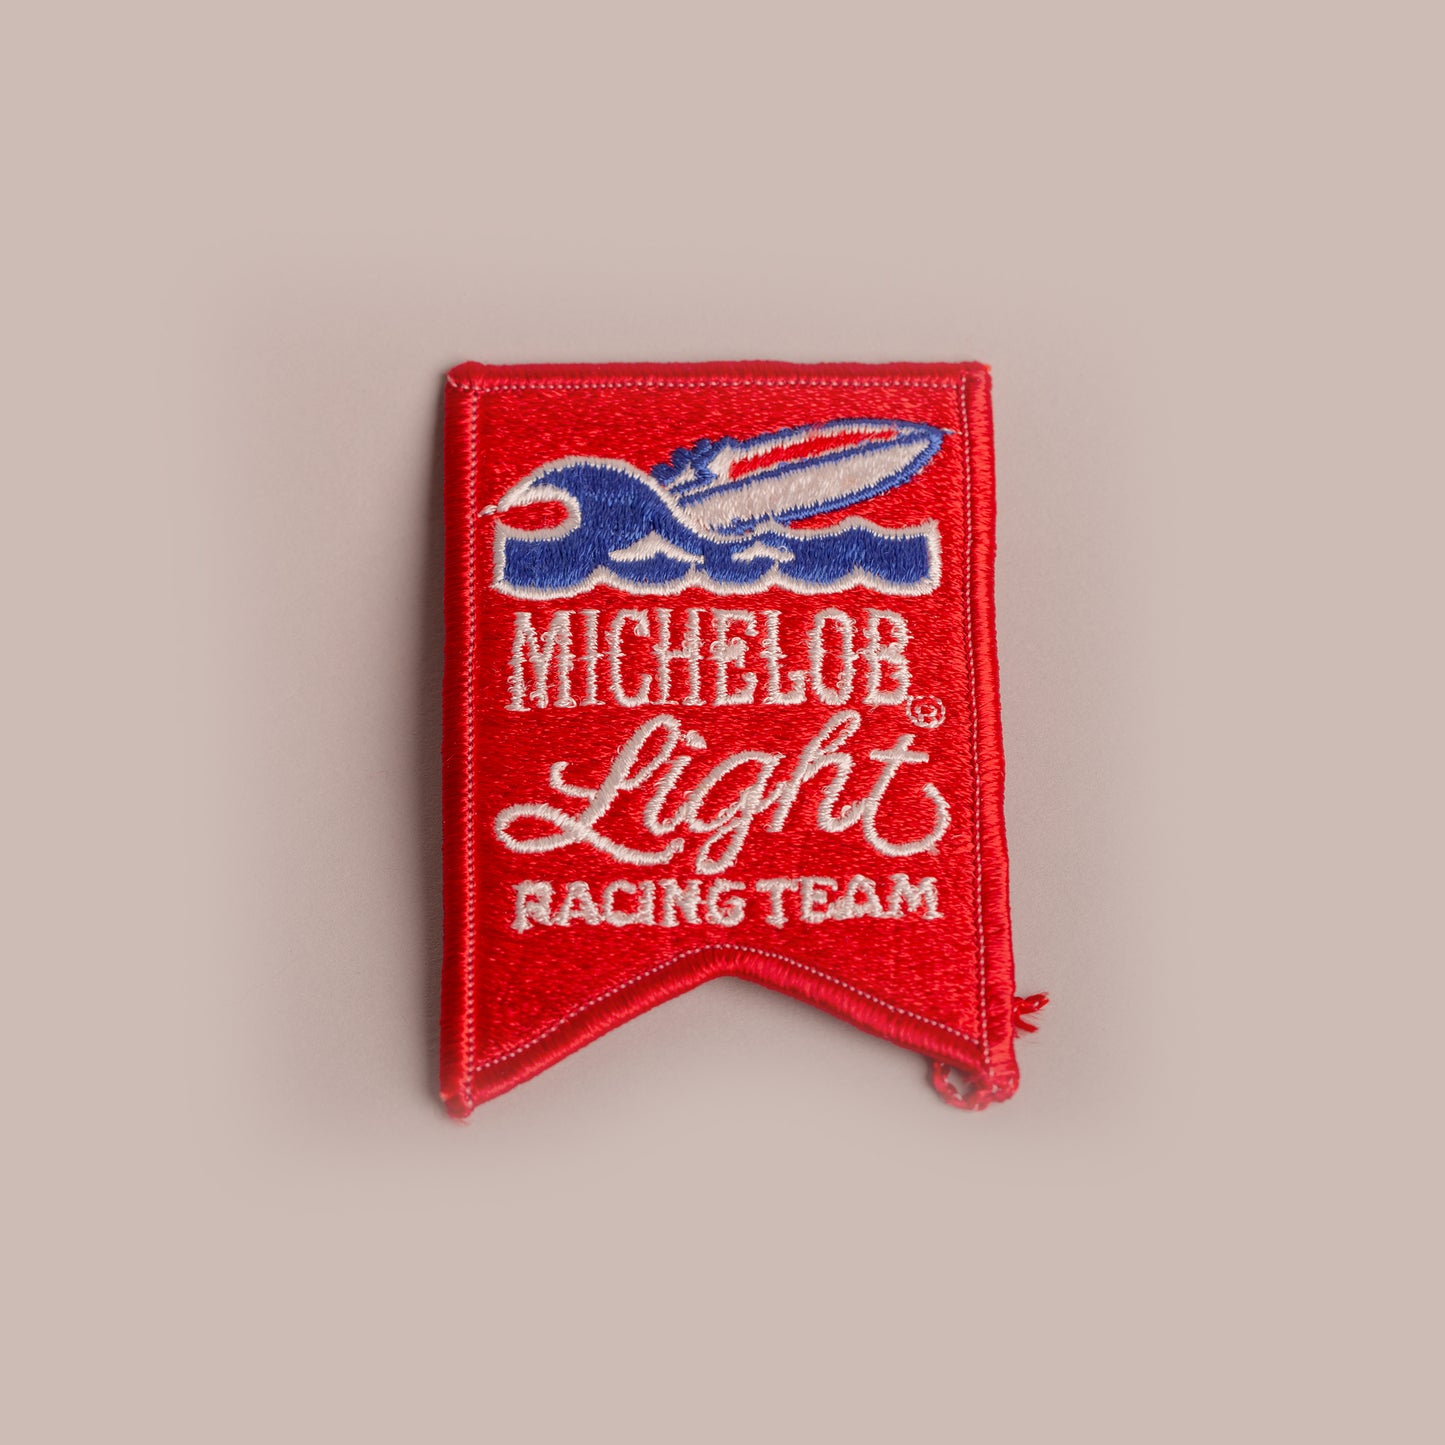 Vintage Patch - Michelob Light Racing Team